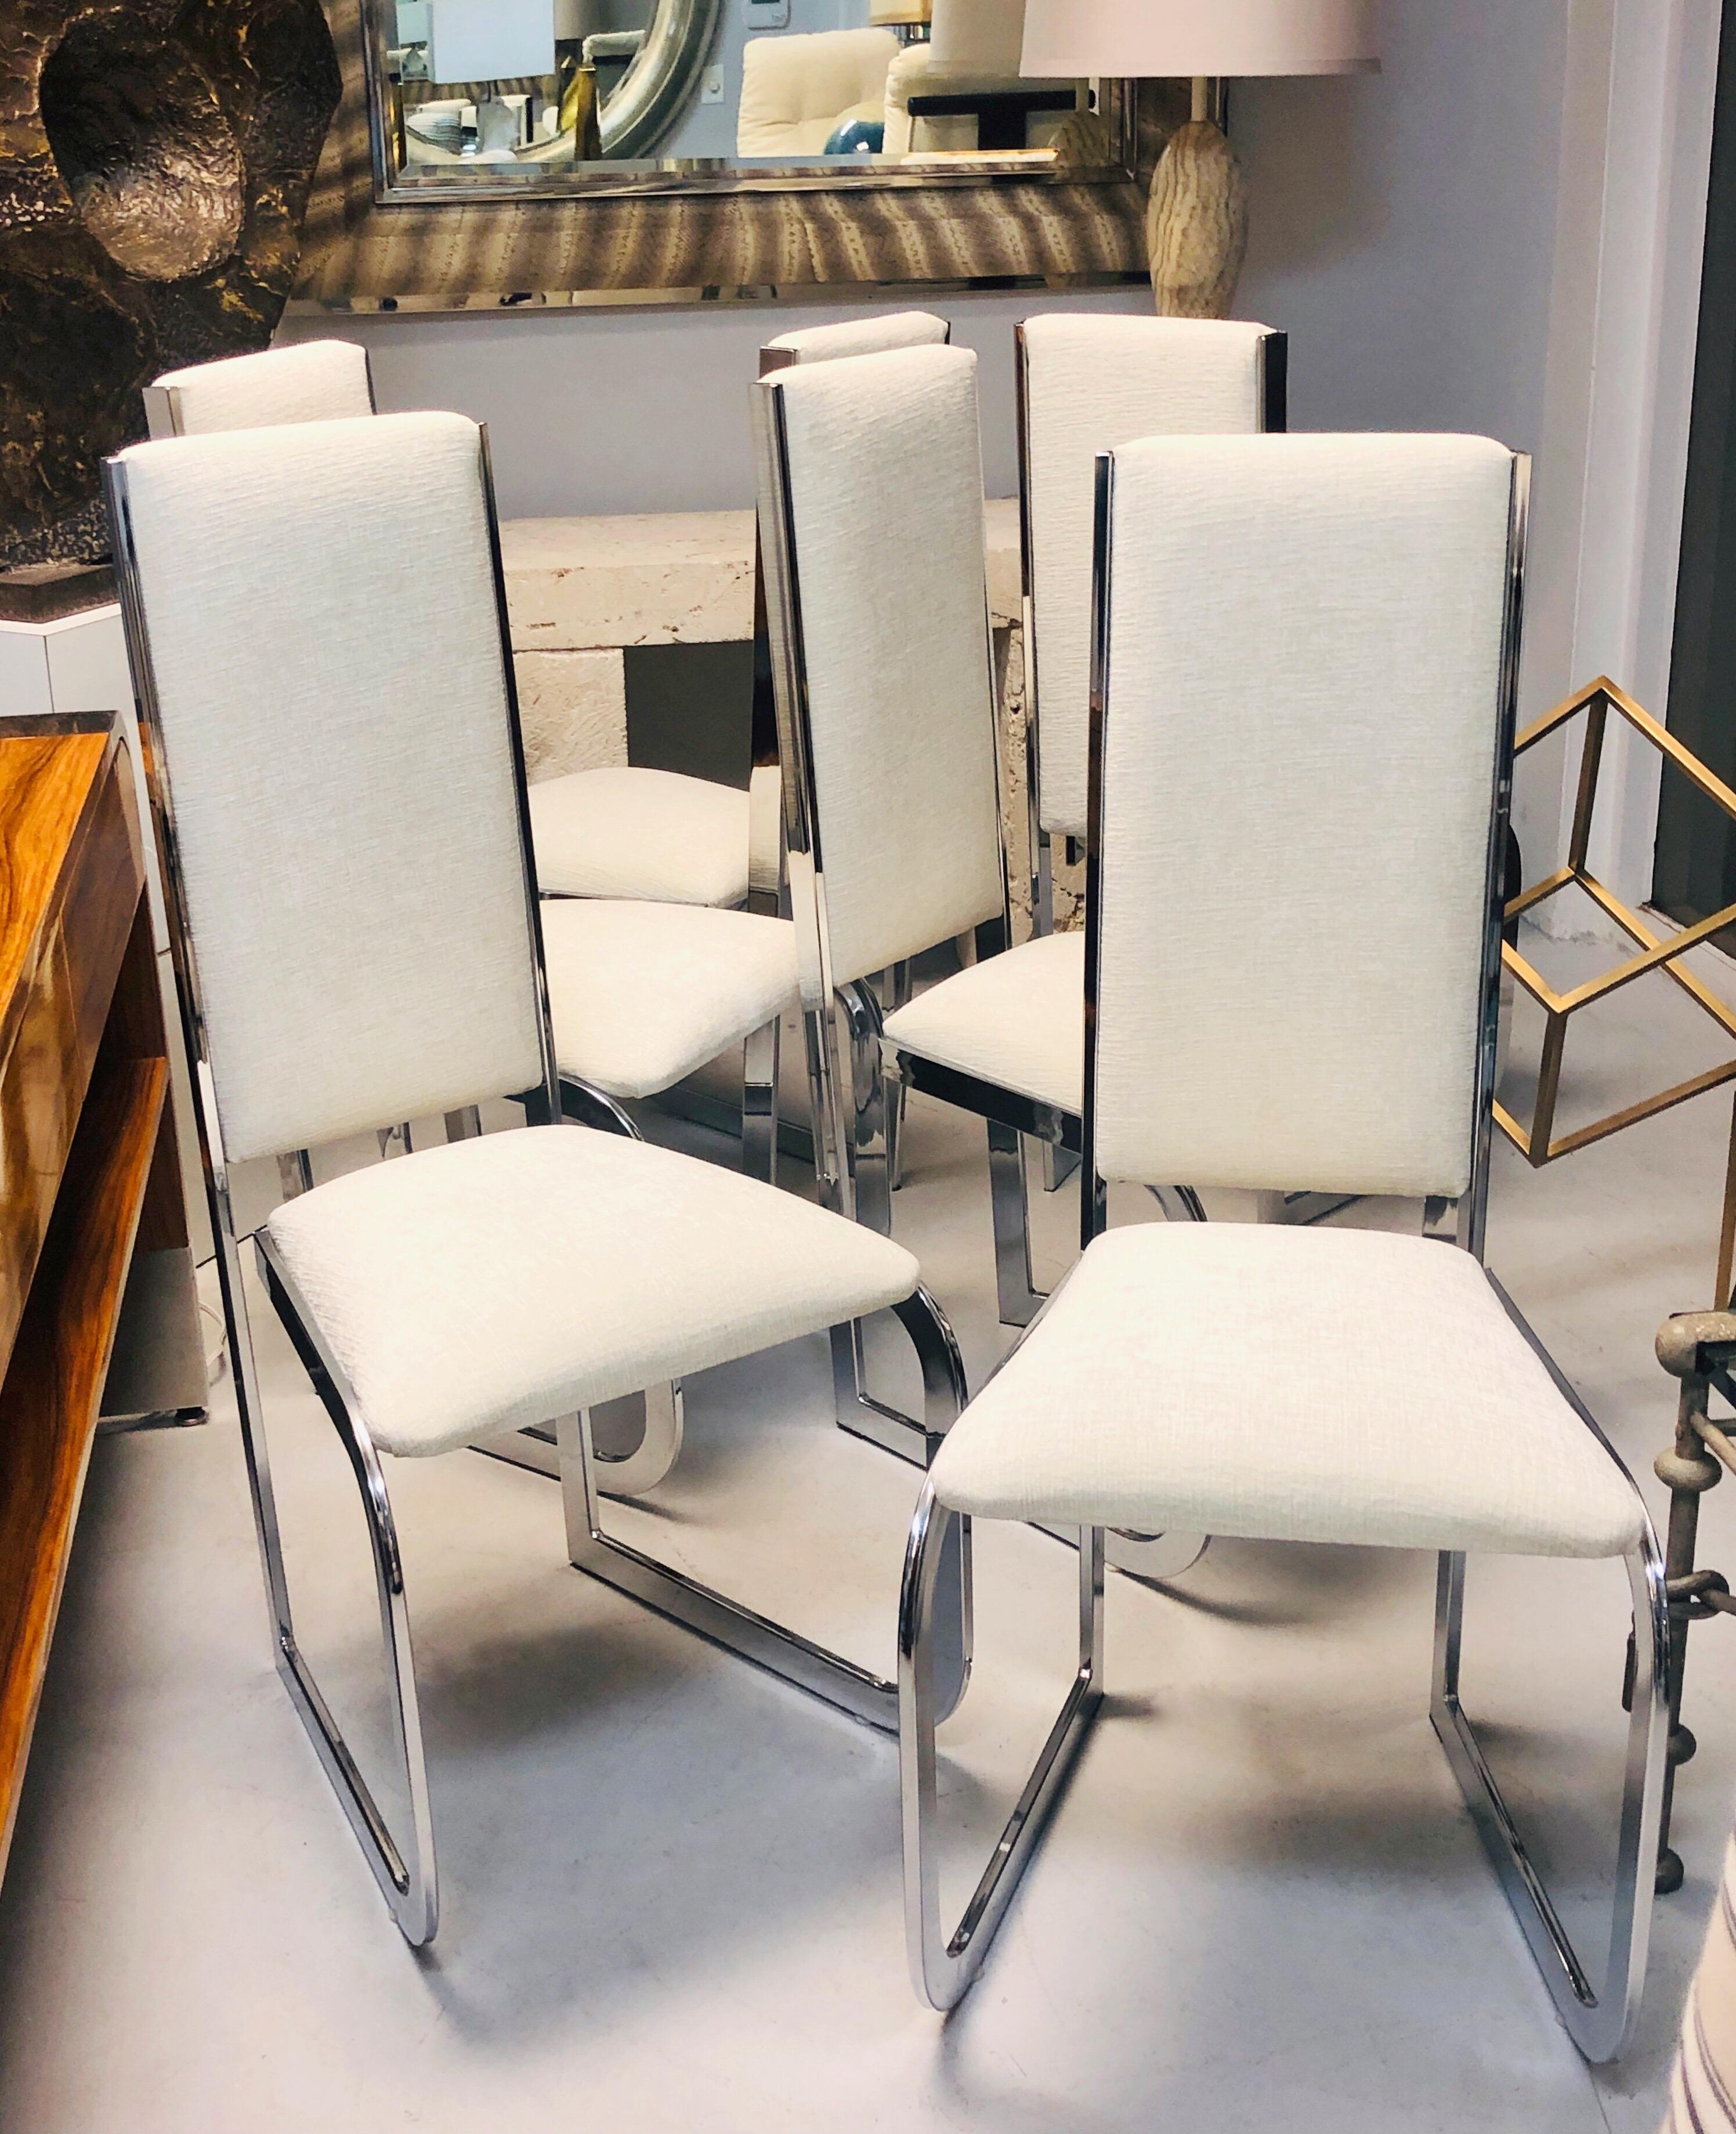 Super chic set of chairs. Simple frames, with cantilevered seats. Note how the frames are wider at the front echoing the shape of the trapezoidal seat.